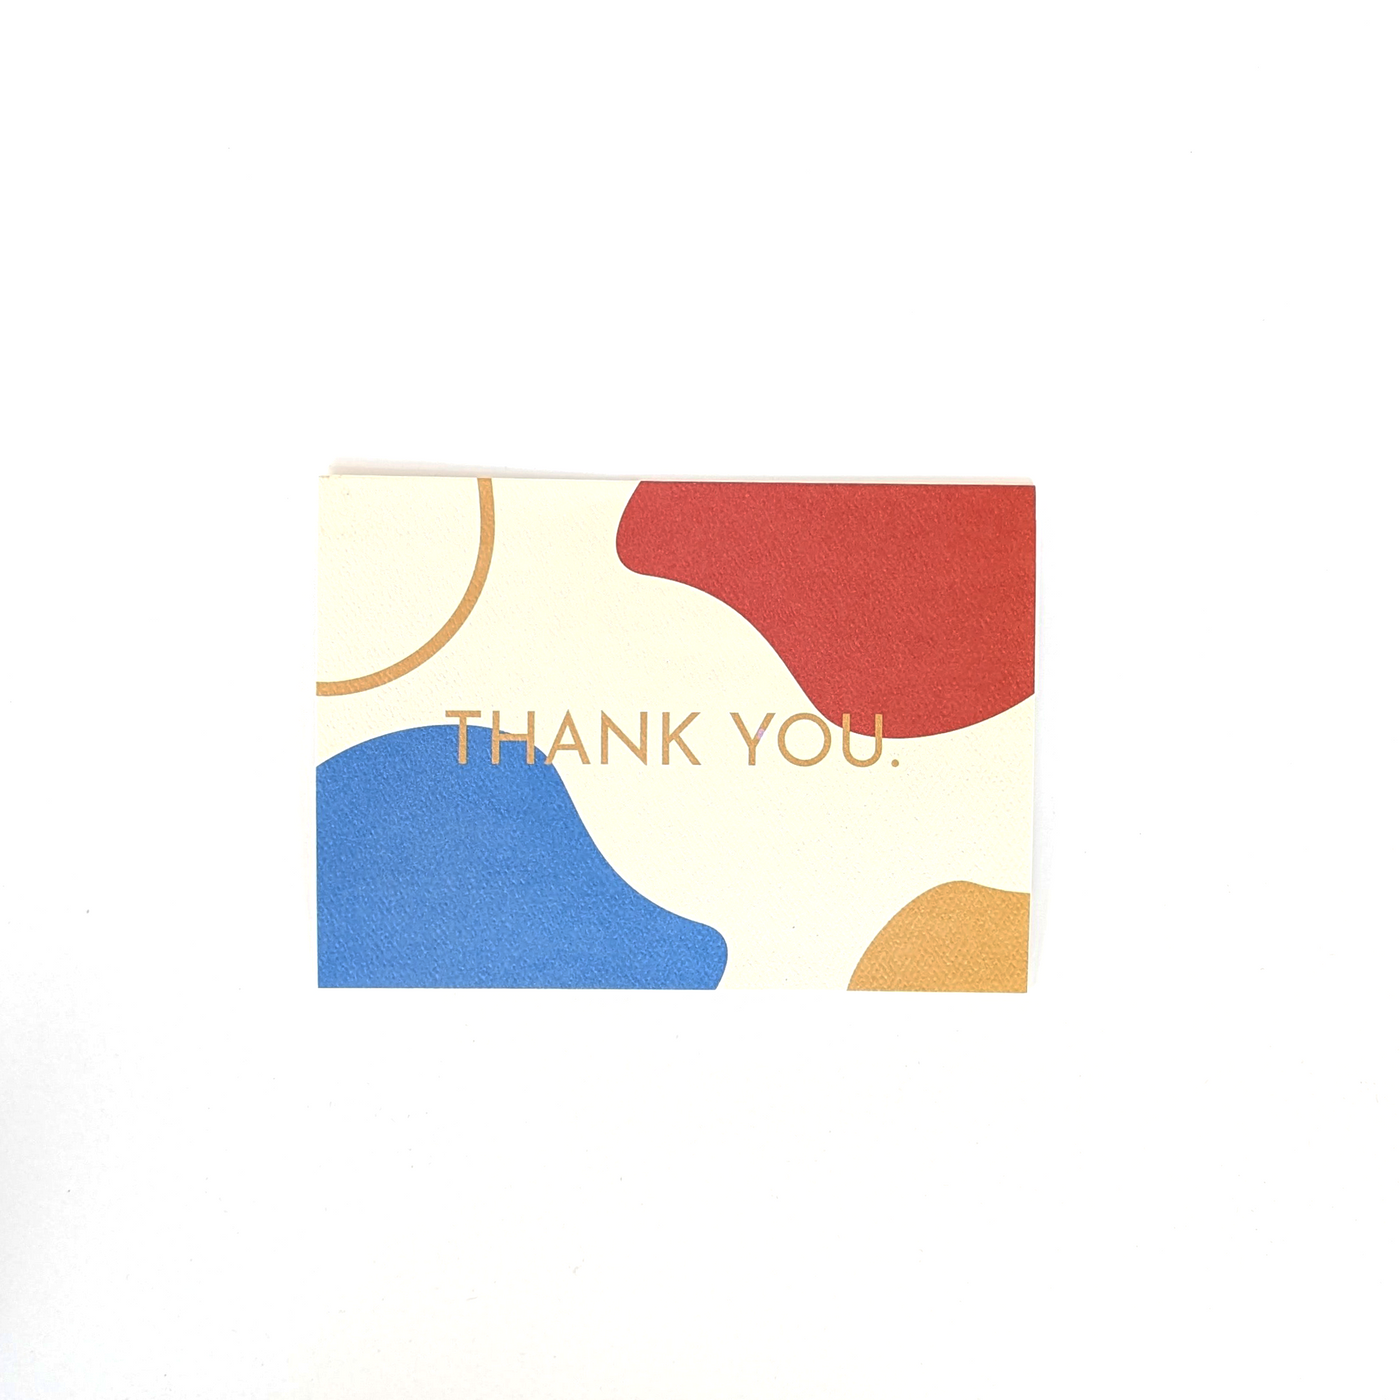 "Retro Thank You Card" with a yellow, red, and blue abstract illustration that reads "Thank You" in white text and simple font